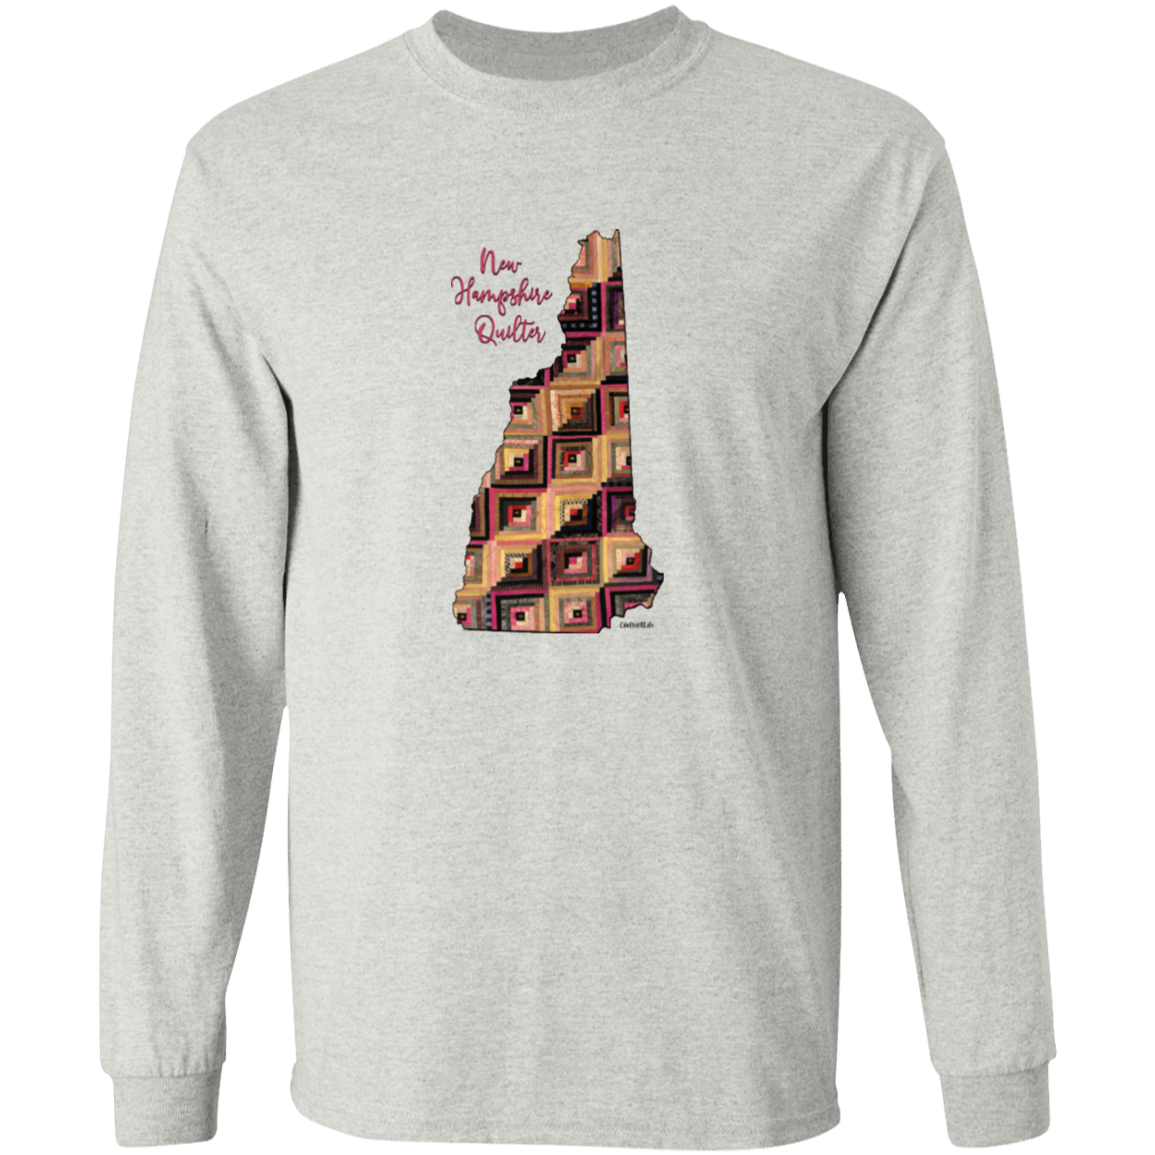 New Hampshire Quilter Long Sleeve T-Shirt, Gift for Quilting Friends and Family